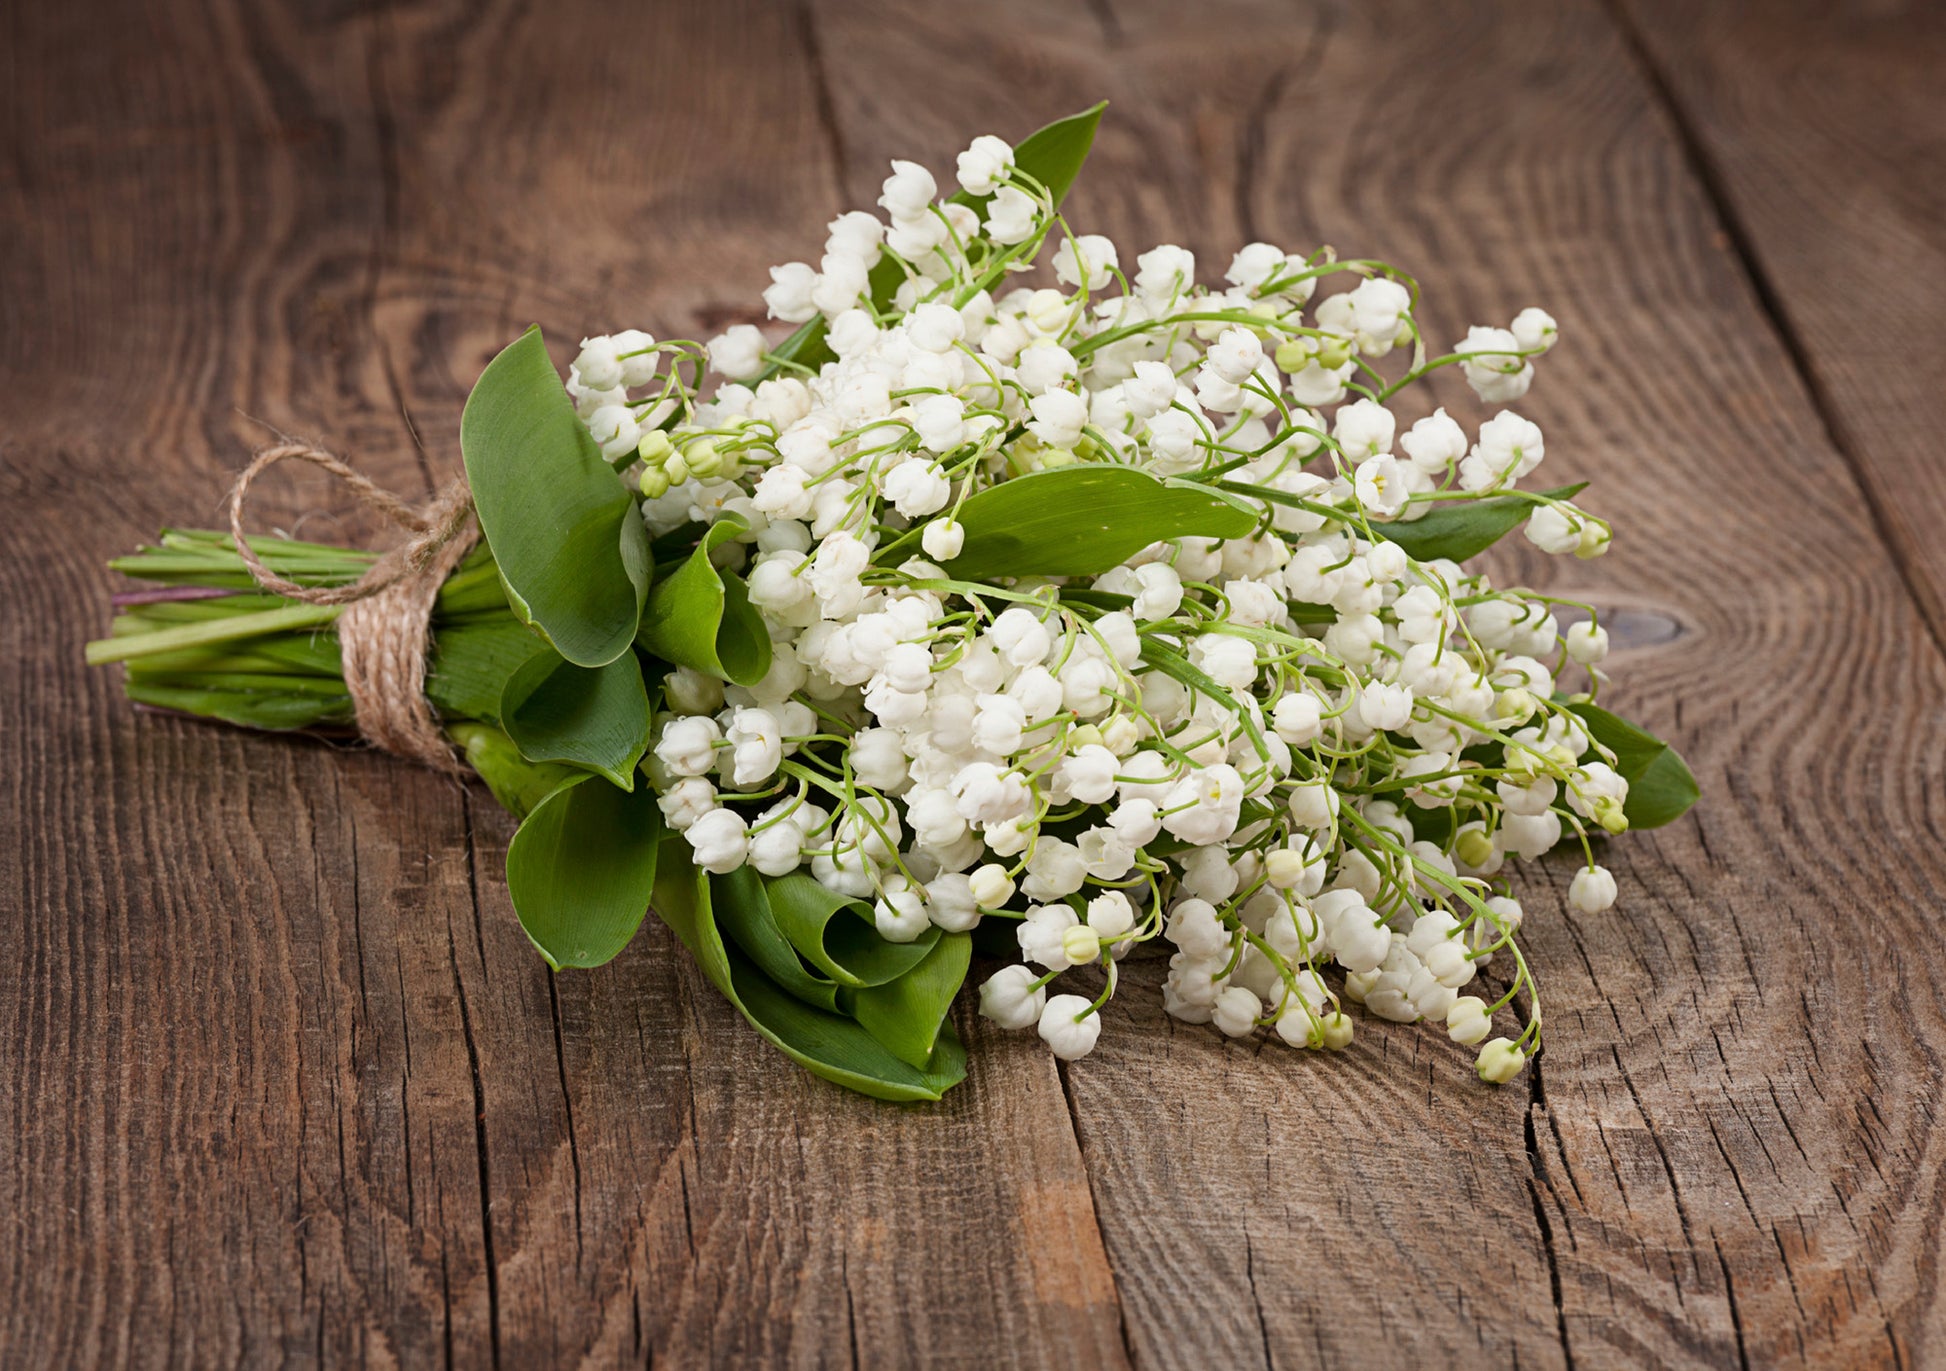 Lily Of The Valley Fragrance Oil – Voyageur Soap & Candle